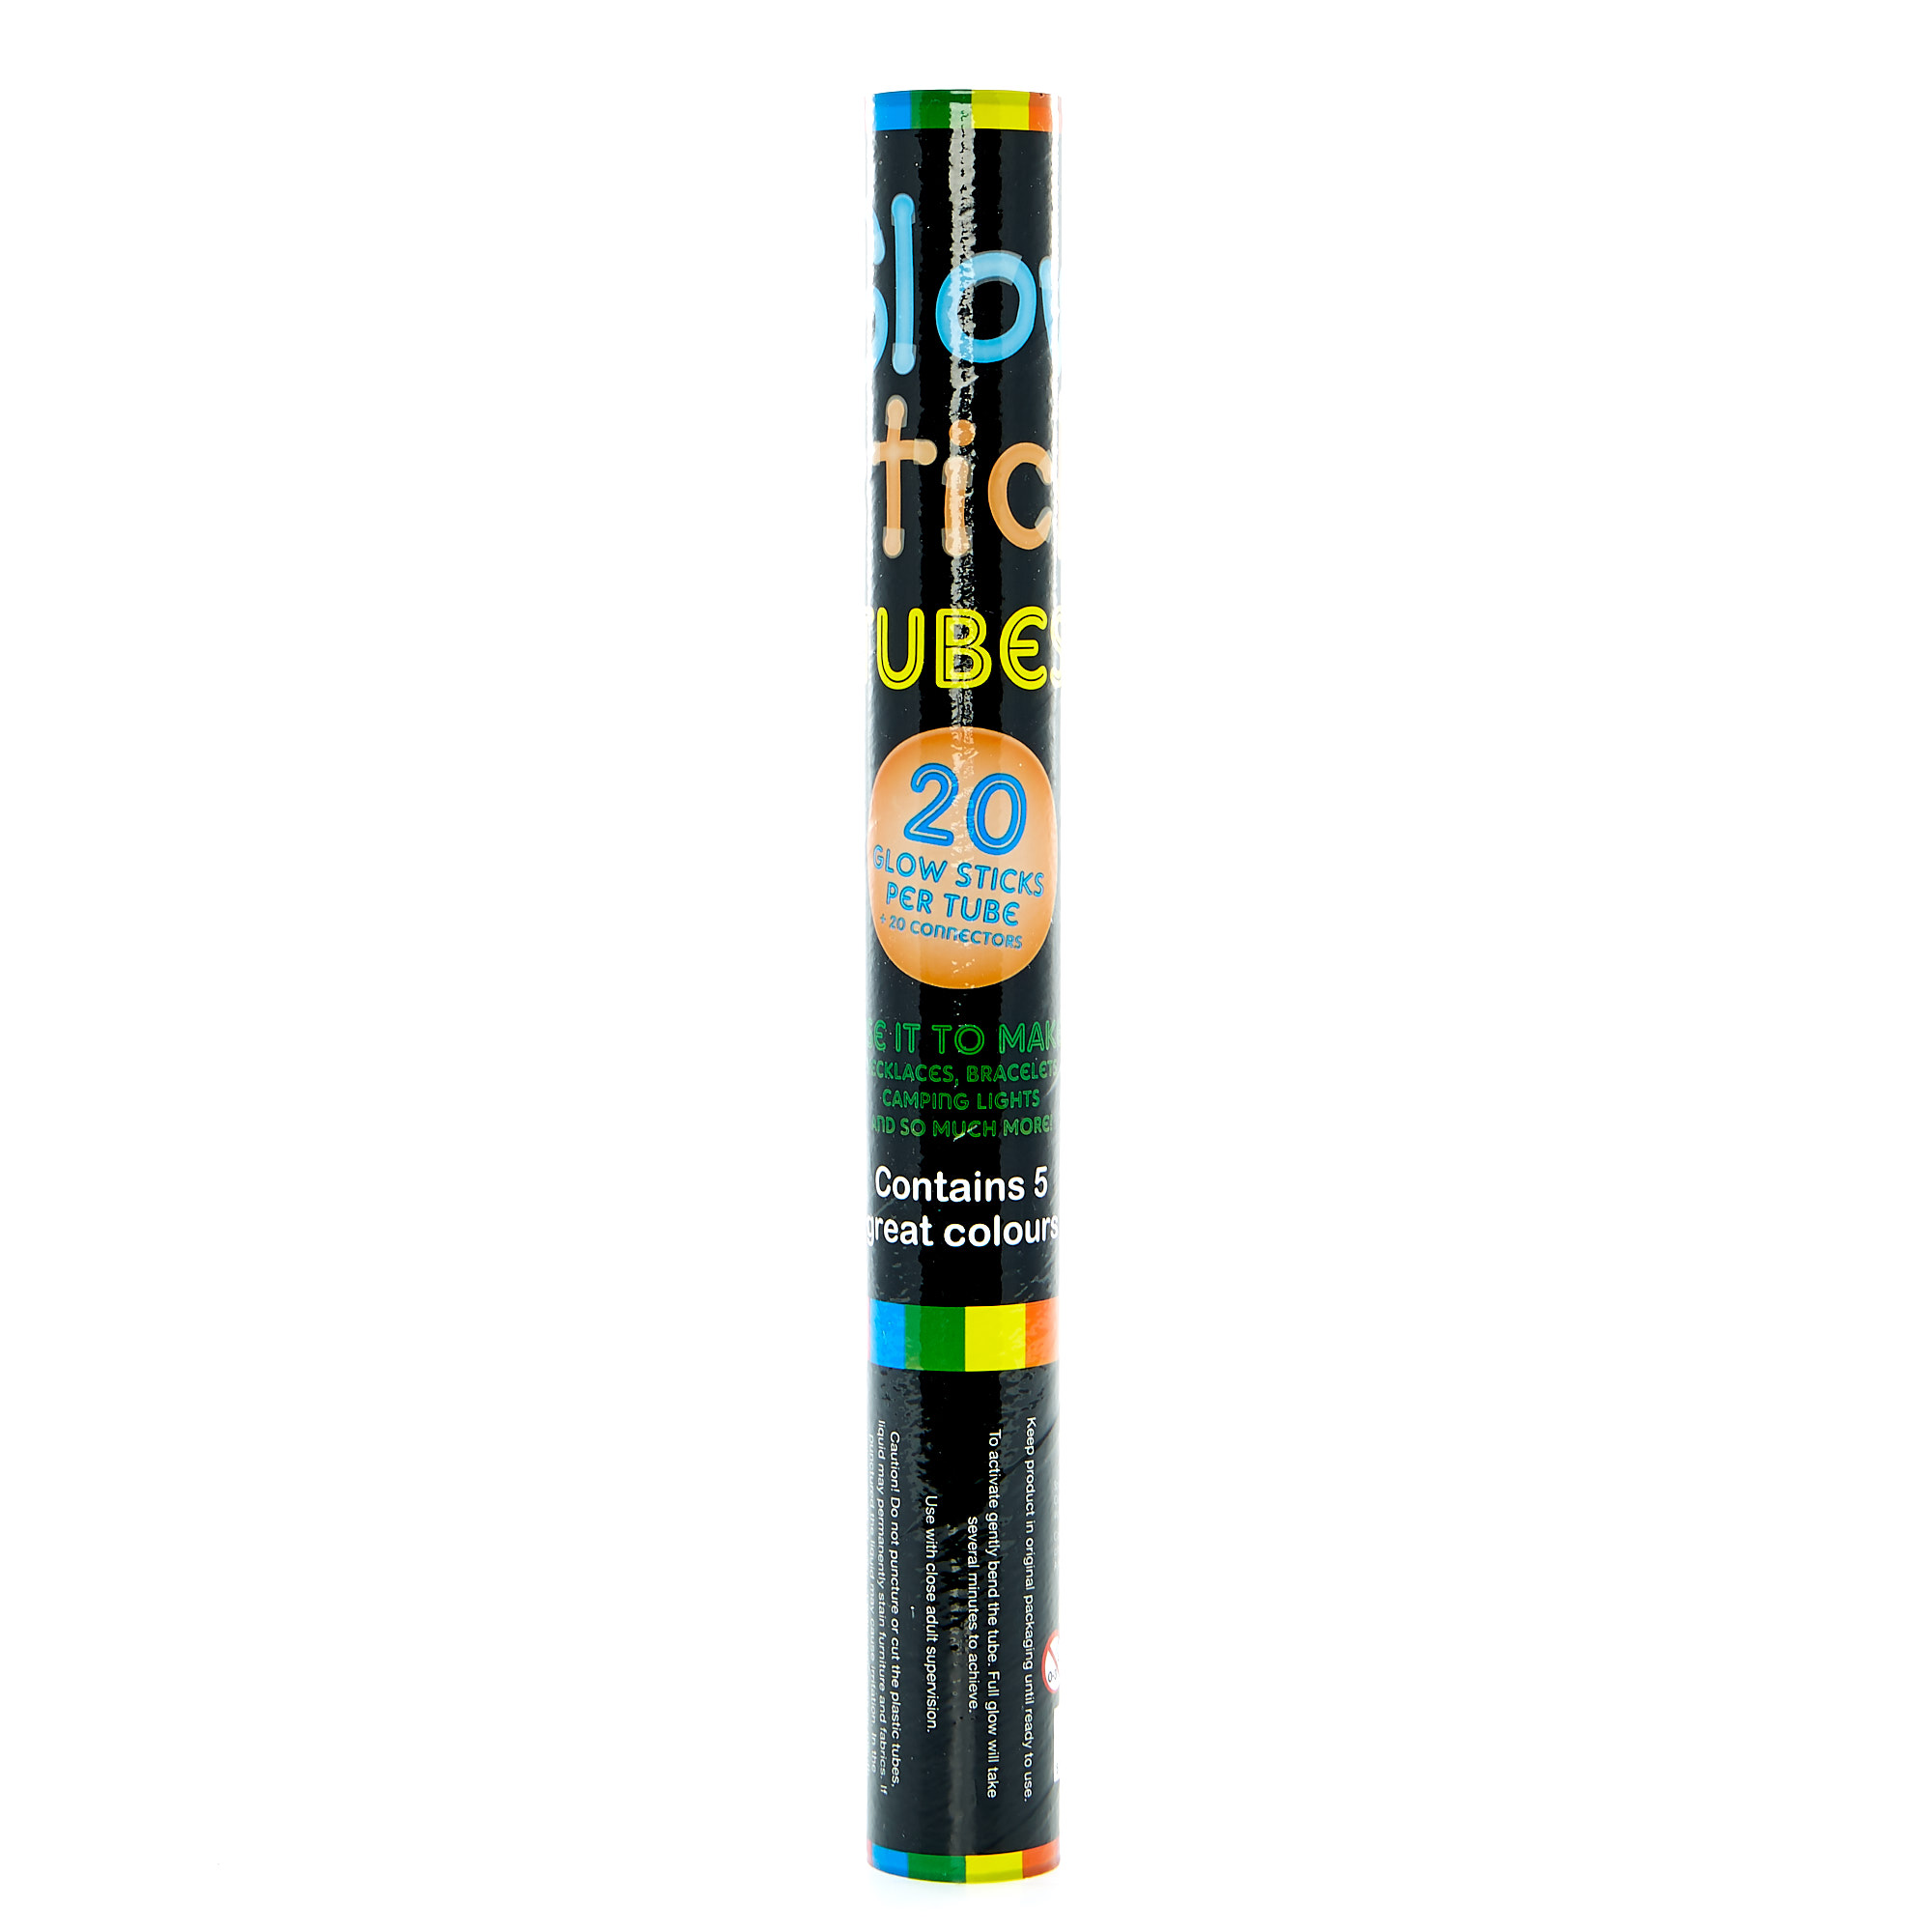 Glow Stick Tubes - Pack Of 20